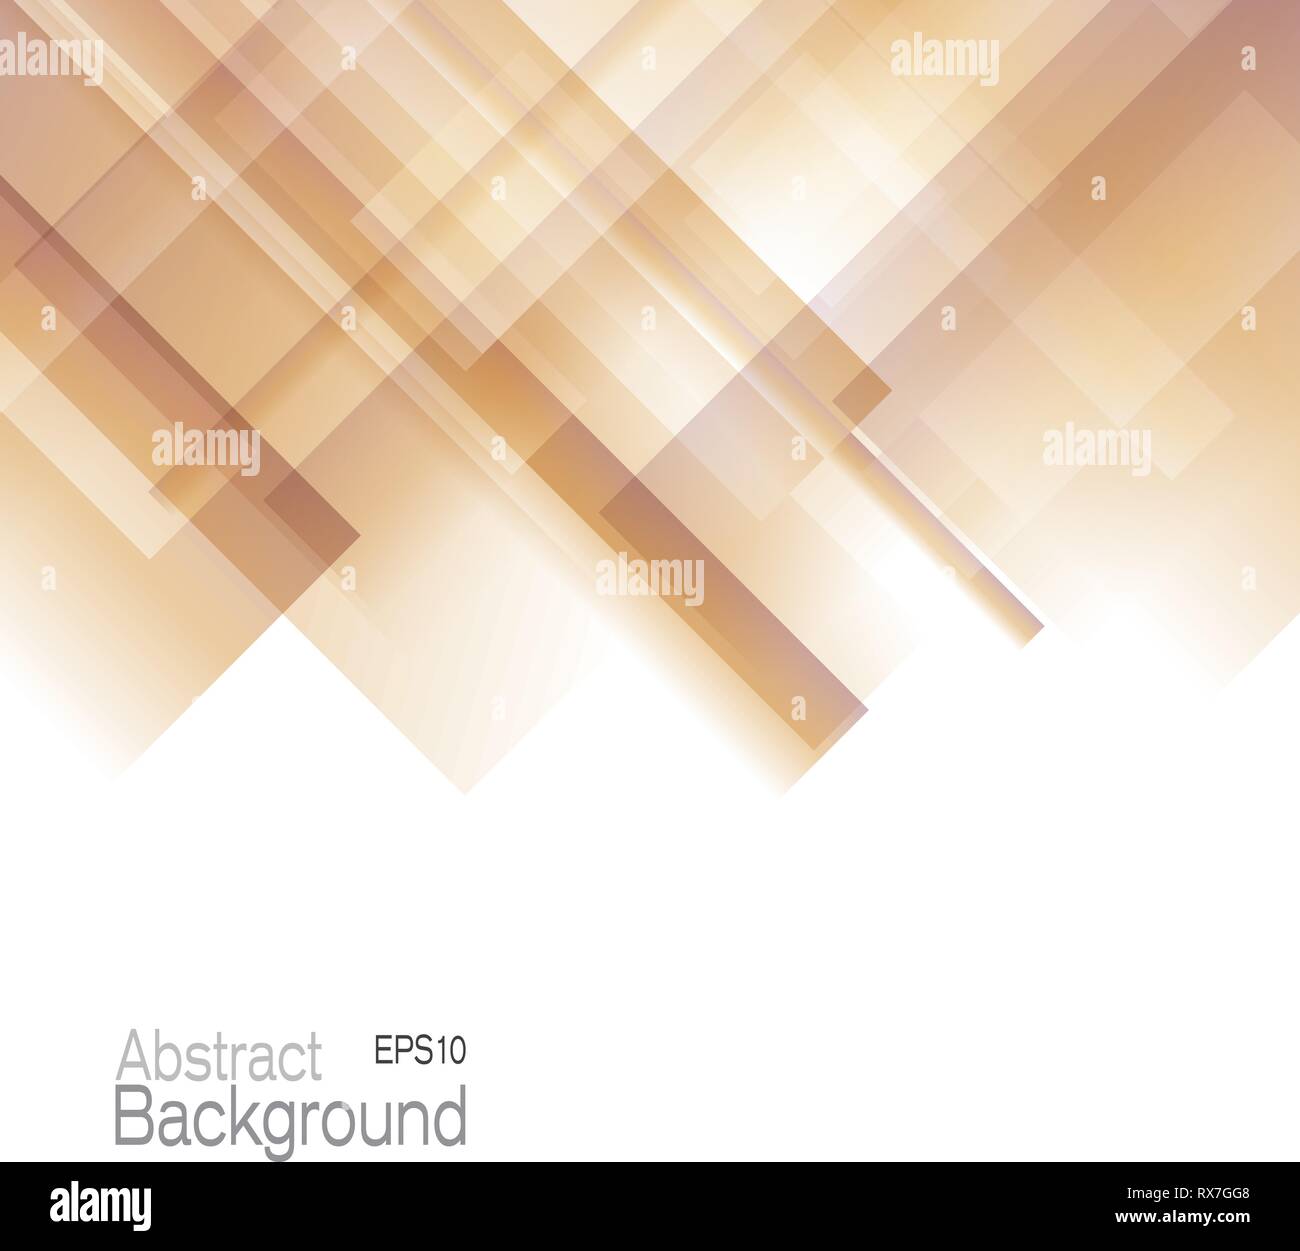 vector geometric abstract background, design with diagonal squares Stock Vector